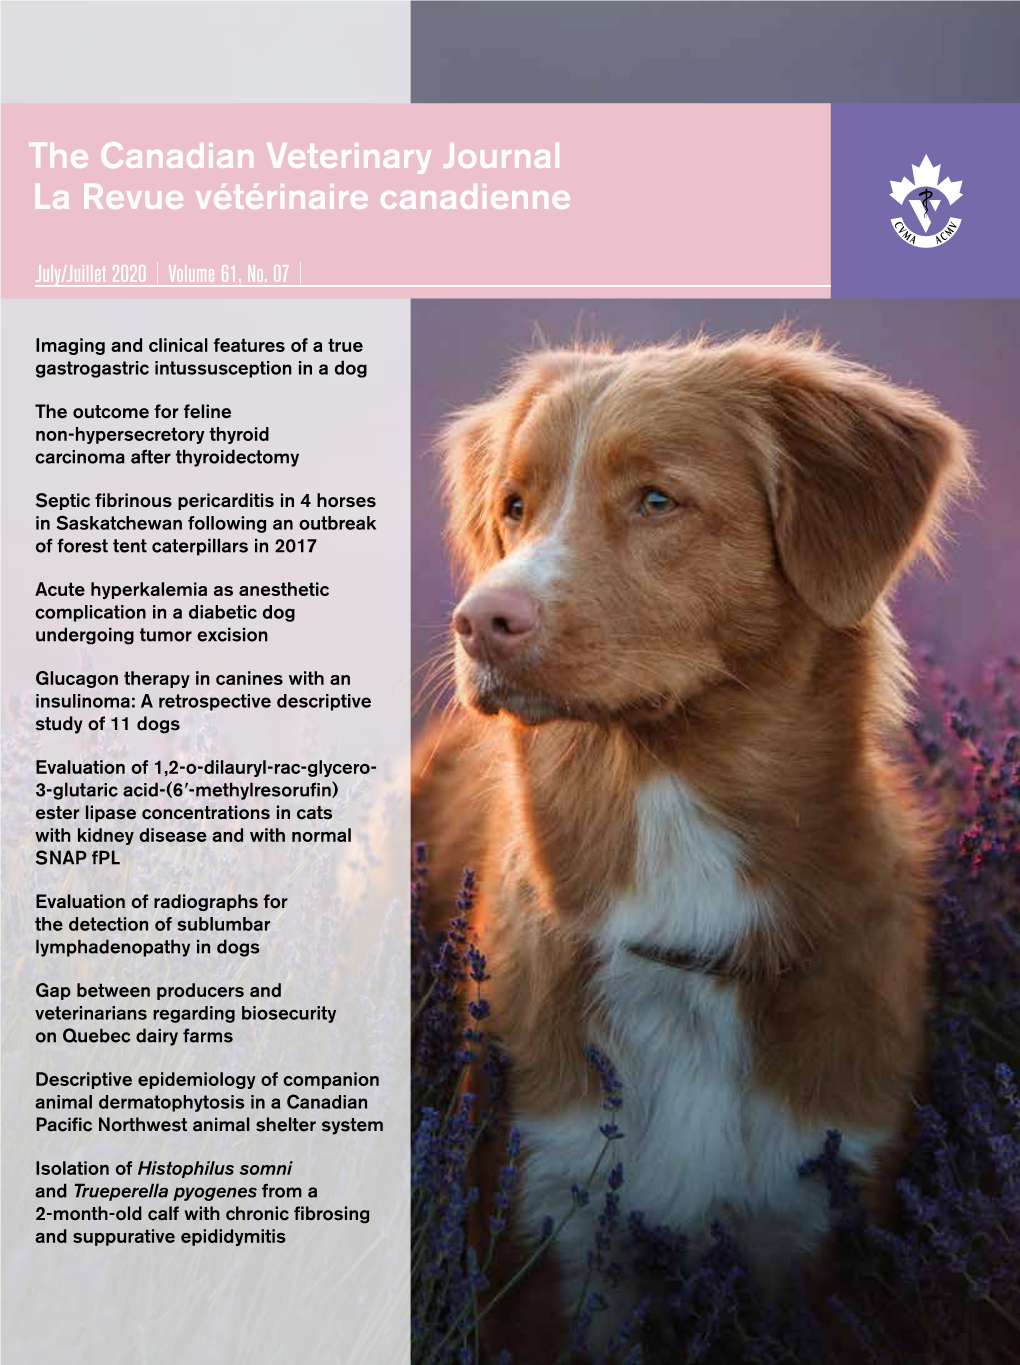 The Canadian Veterinary Journal La Revue Vétérinaire Canadienne Imaging and Clinical Features of a True Gastrogastric Intussusception in a Dog